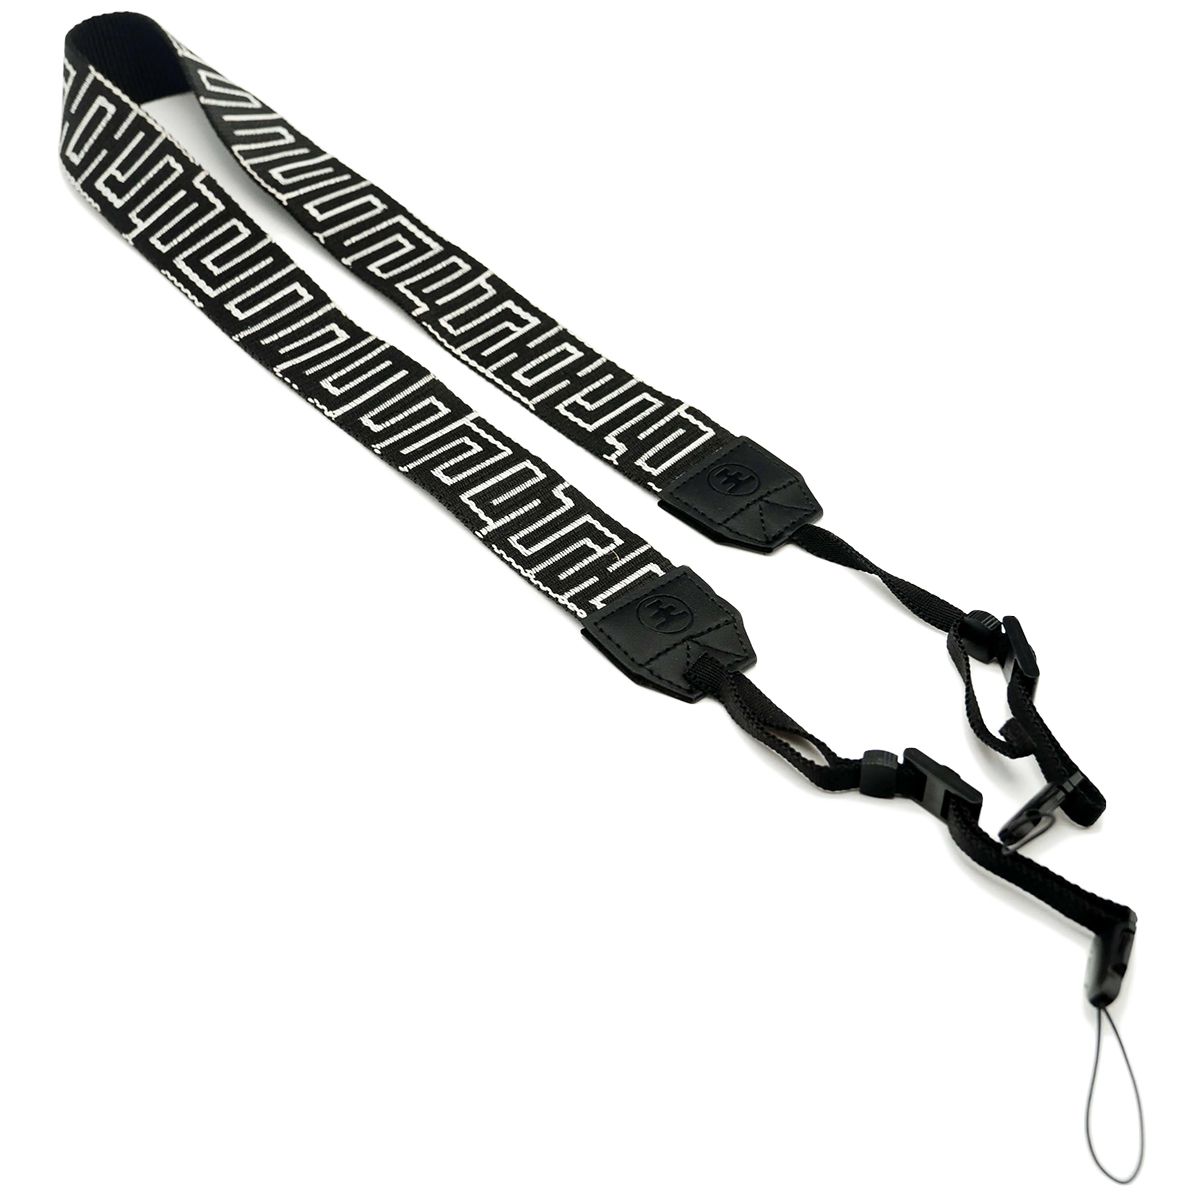 Nocs Woven Tapestry Strap